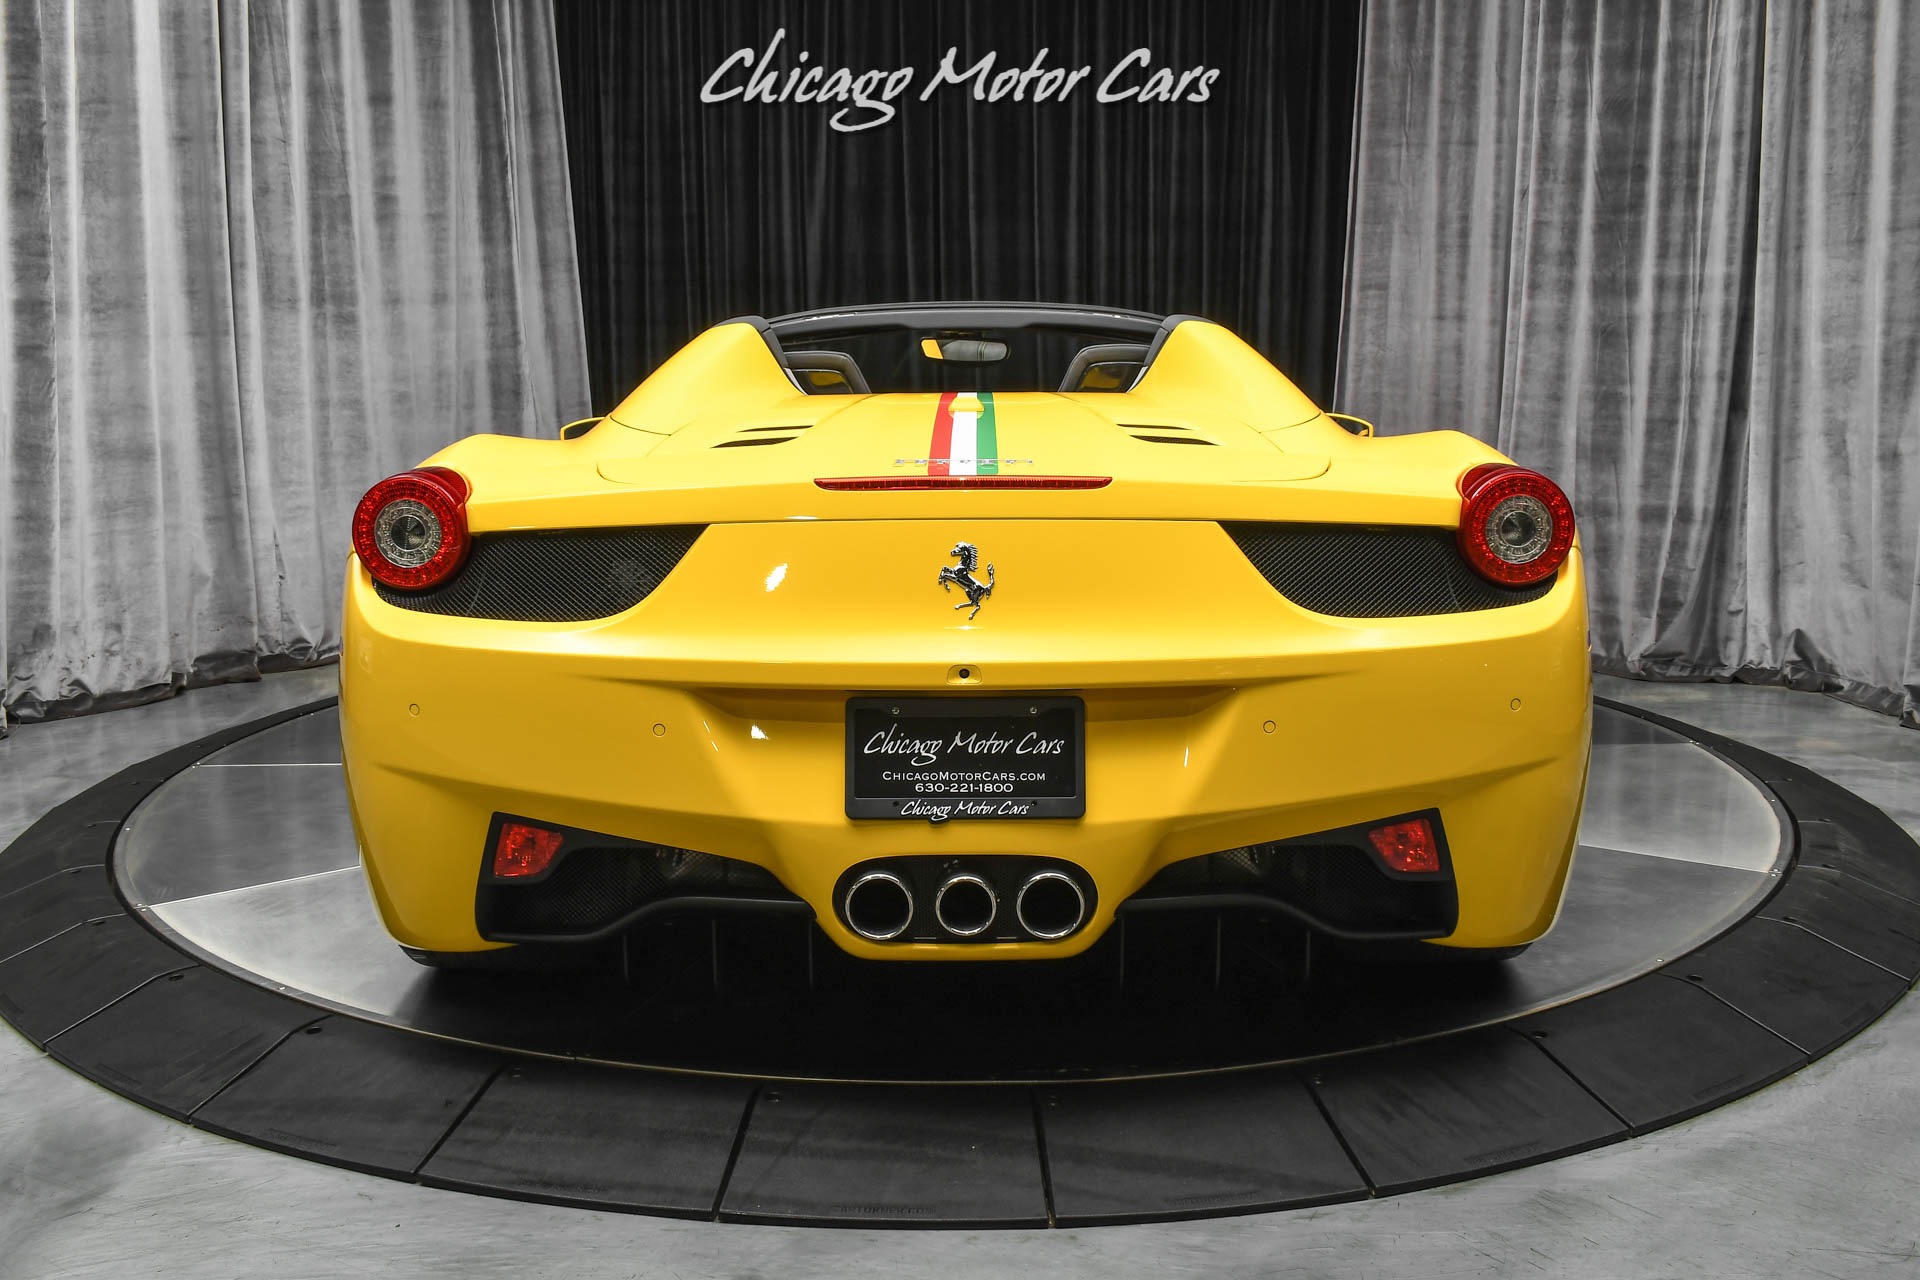 Used-2013-Ferrari-458-Spider-LOADED-Carbon-Fiber-Race-Package-Lift-System-Low-Miles-PPF